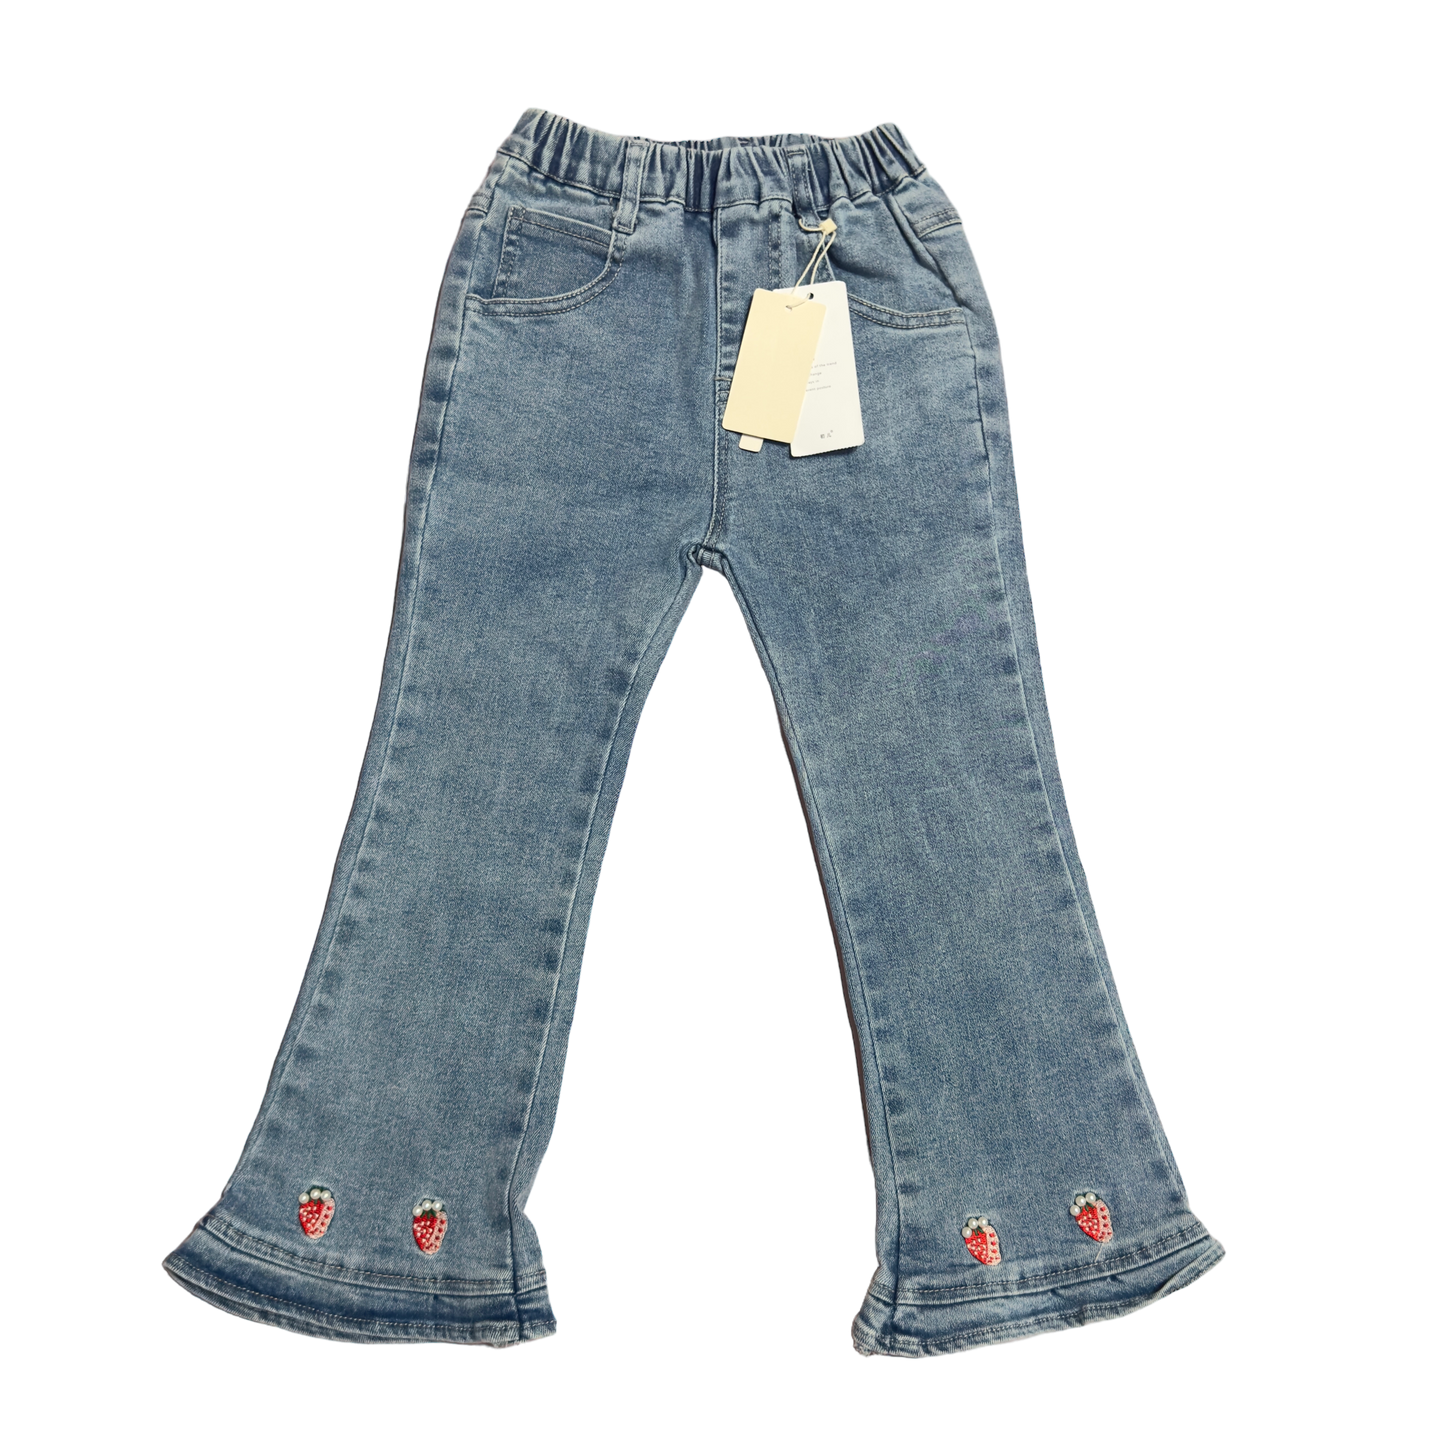 Girls jeans | Size: 4-5 years| BNWT